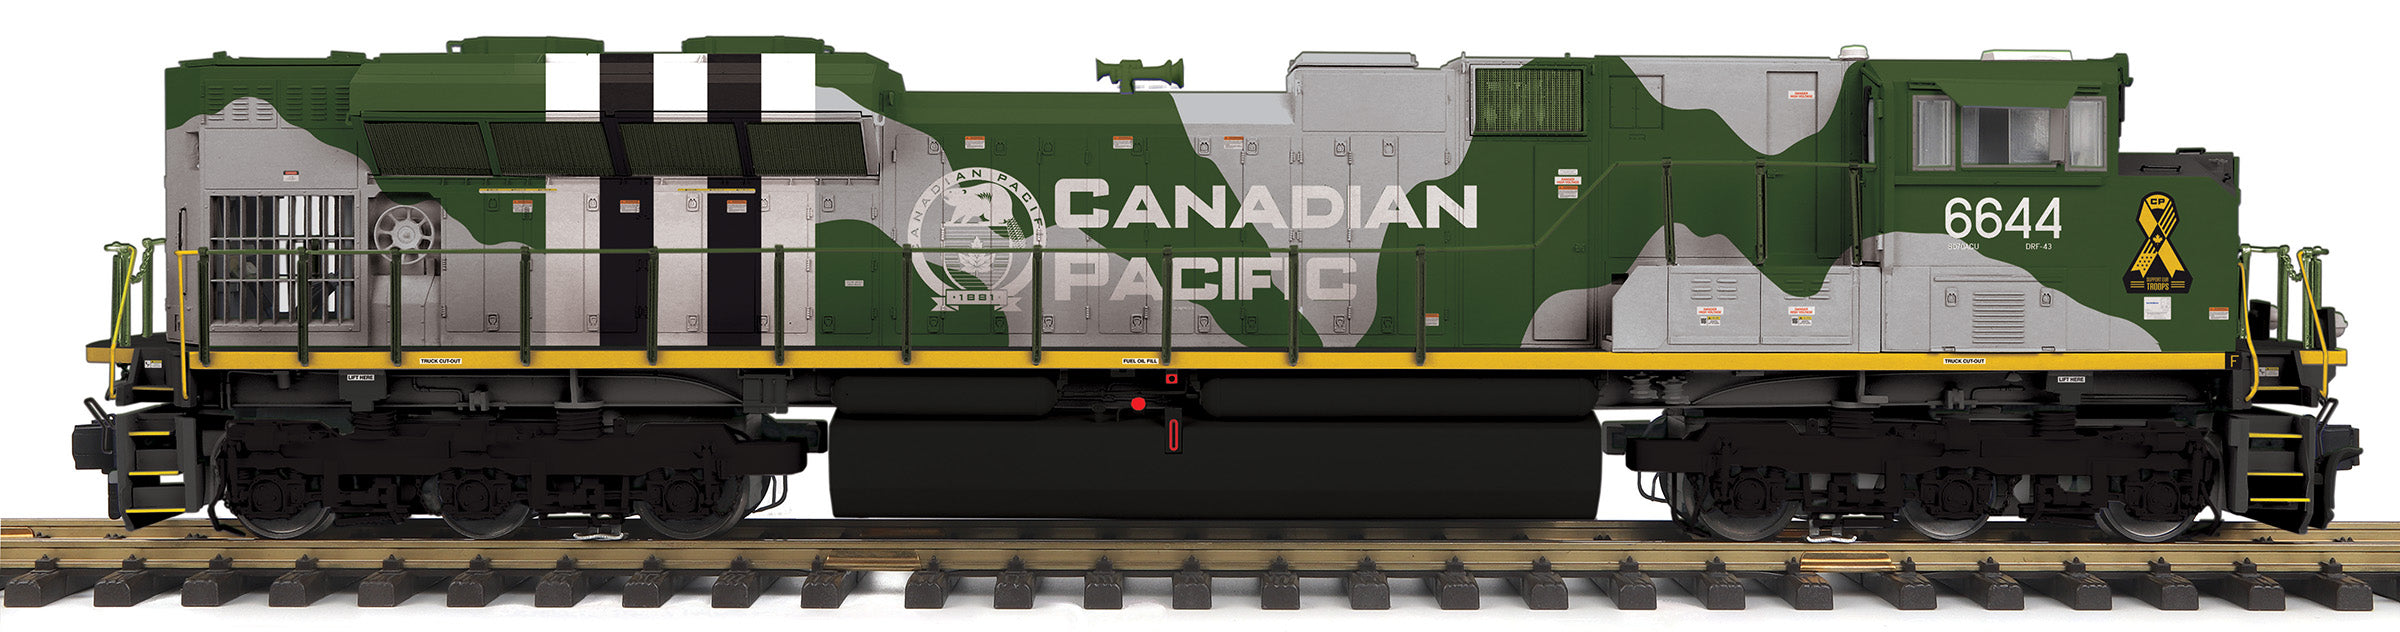 MTH G 70-2155-1 - SD70AH Diesel Engine "Canadian Pacific" D-Day Version #6644 w/ PS3